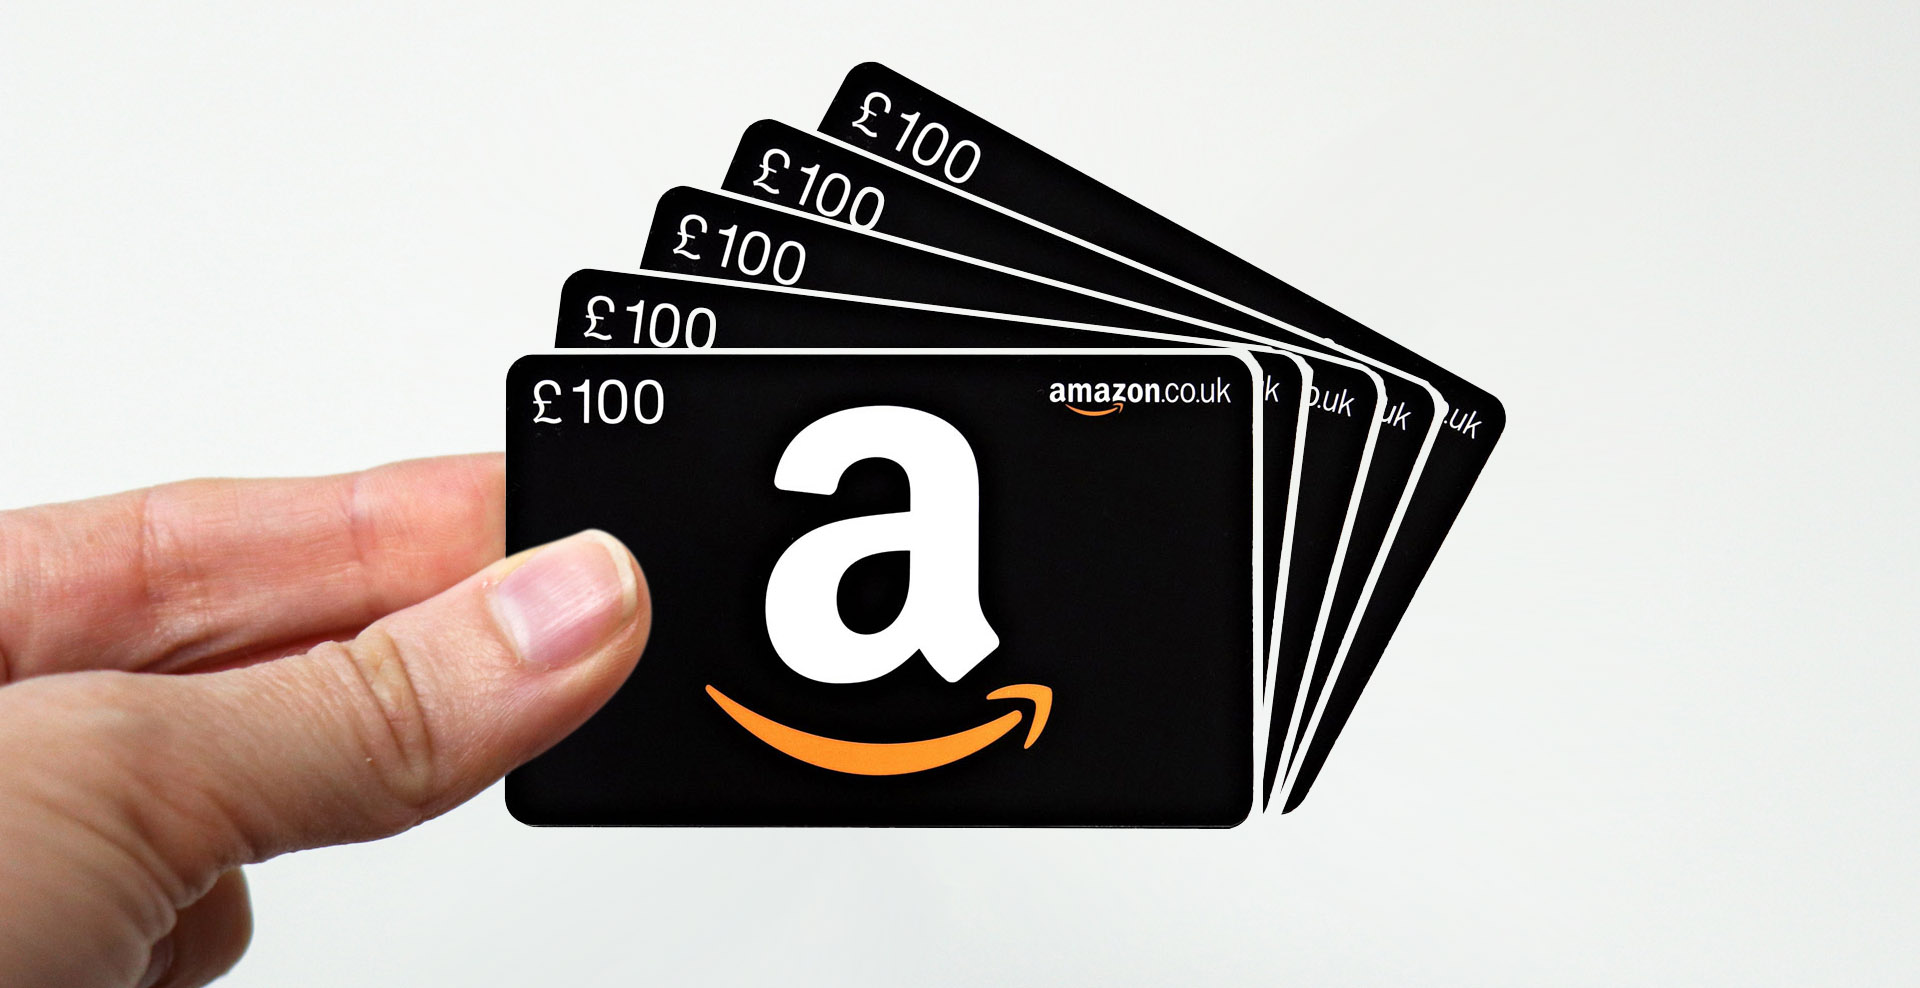 Refer A Friend and get £100 in Amazon Gift Cards